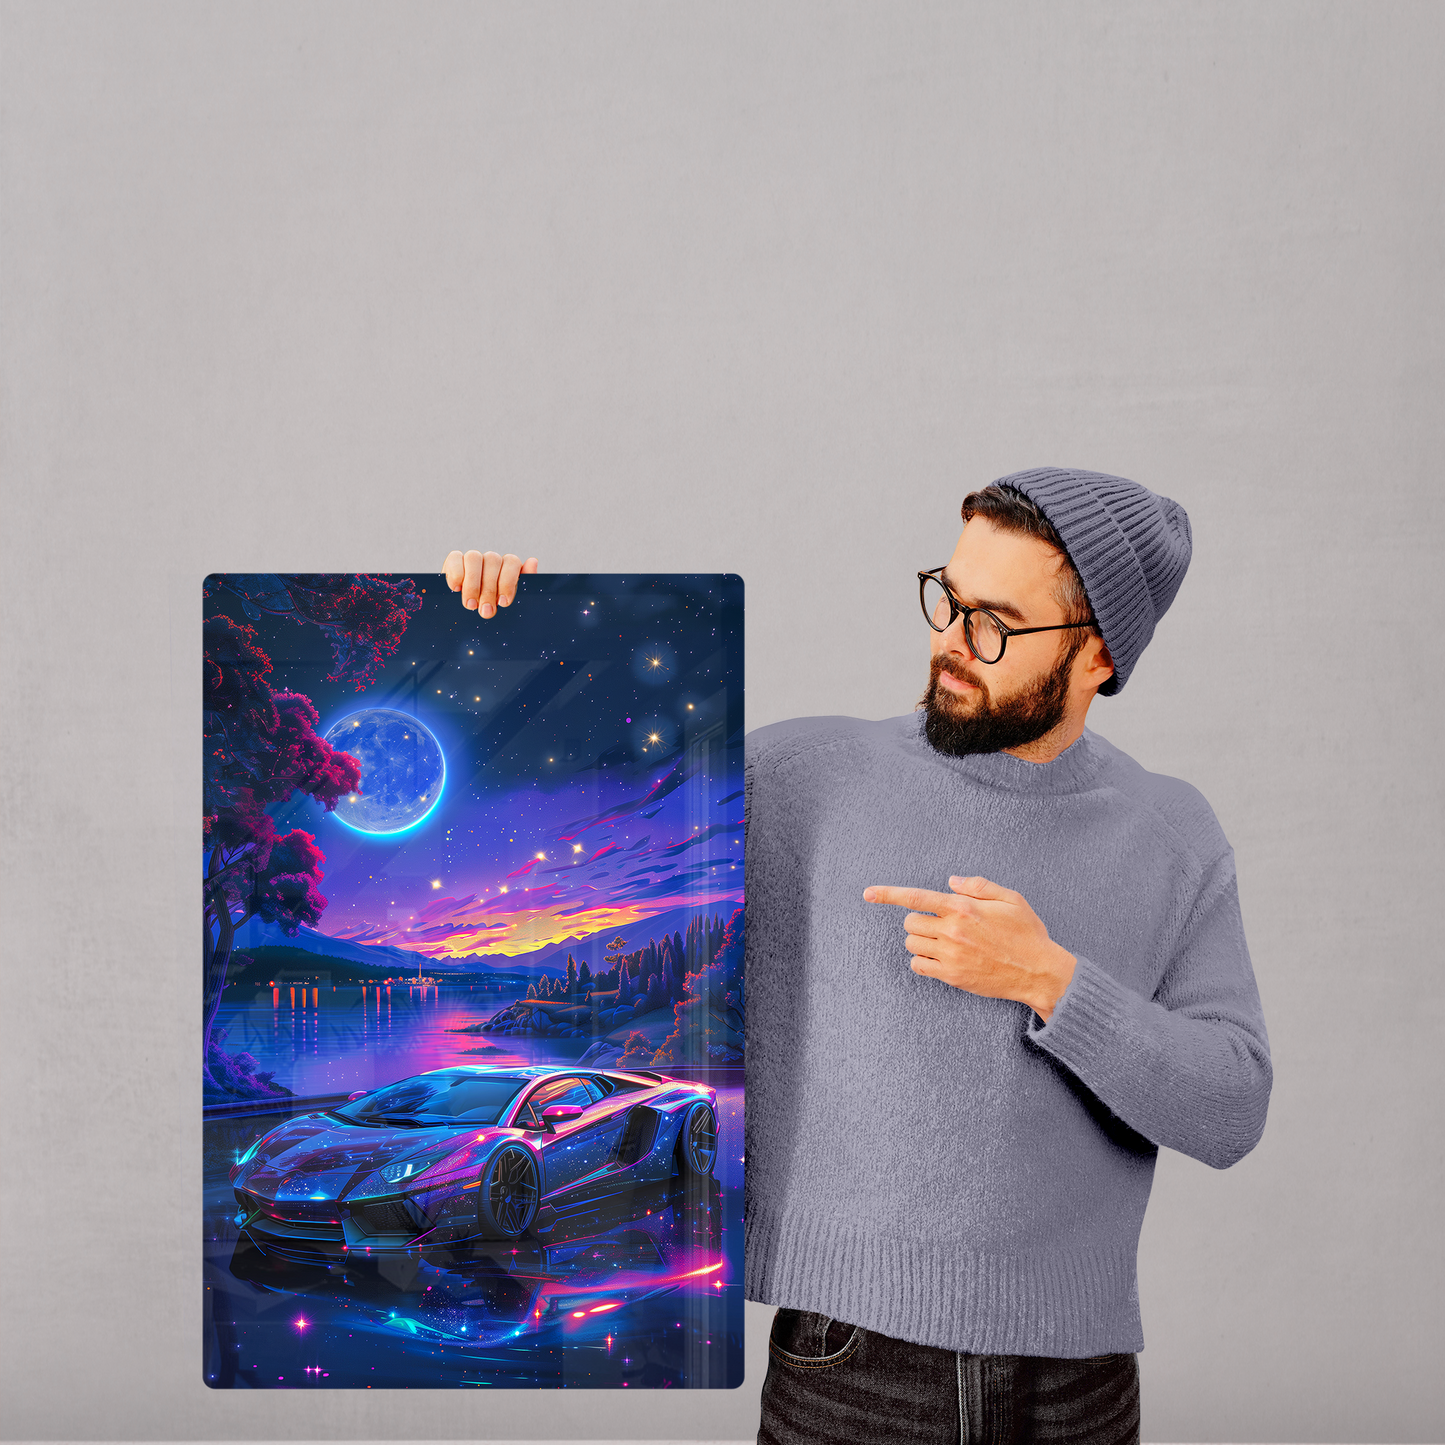 Cosmic Cruise (Acrylic)Embrace sophistication with 'Cosmic Cruise' in acrylic from RimaGallery. Modern elegance meets durability for art lovers. Free US shipping. Shop now!RimaGallery